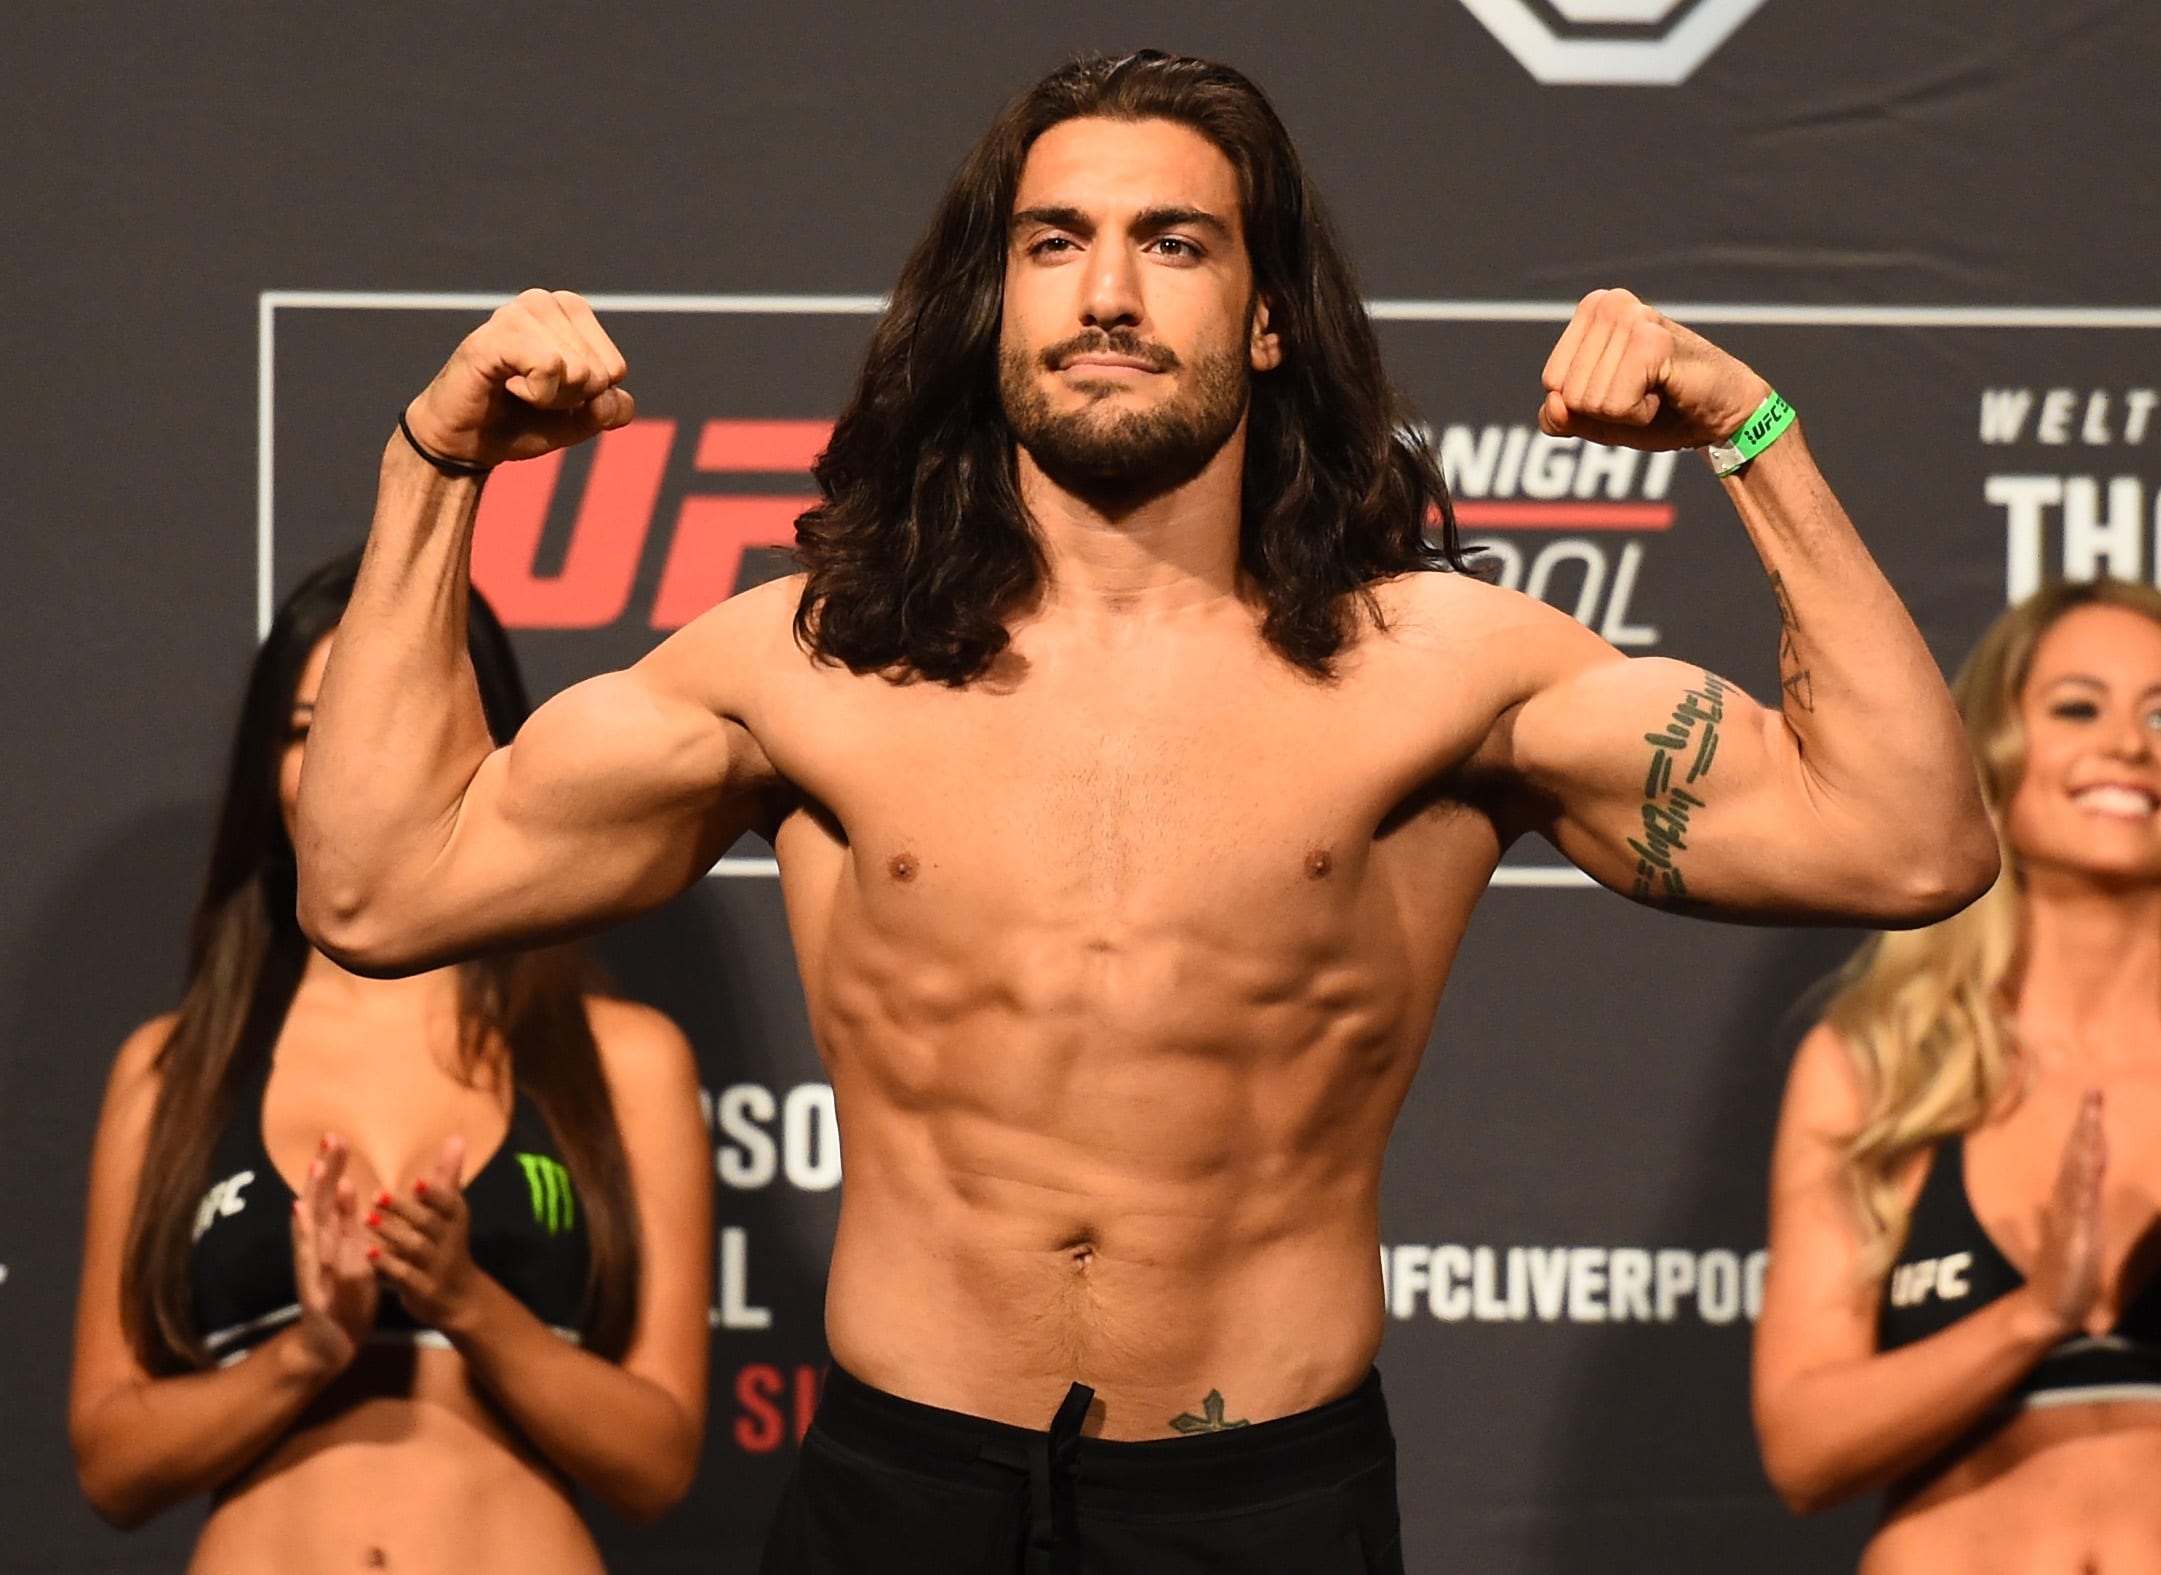 The MMA Daily Former UFC Fighter Elias Theodorou dies at 34